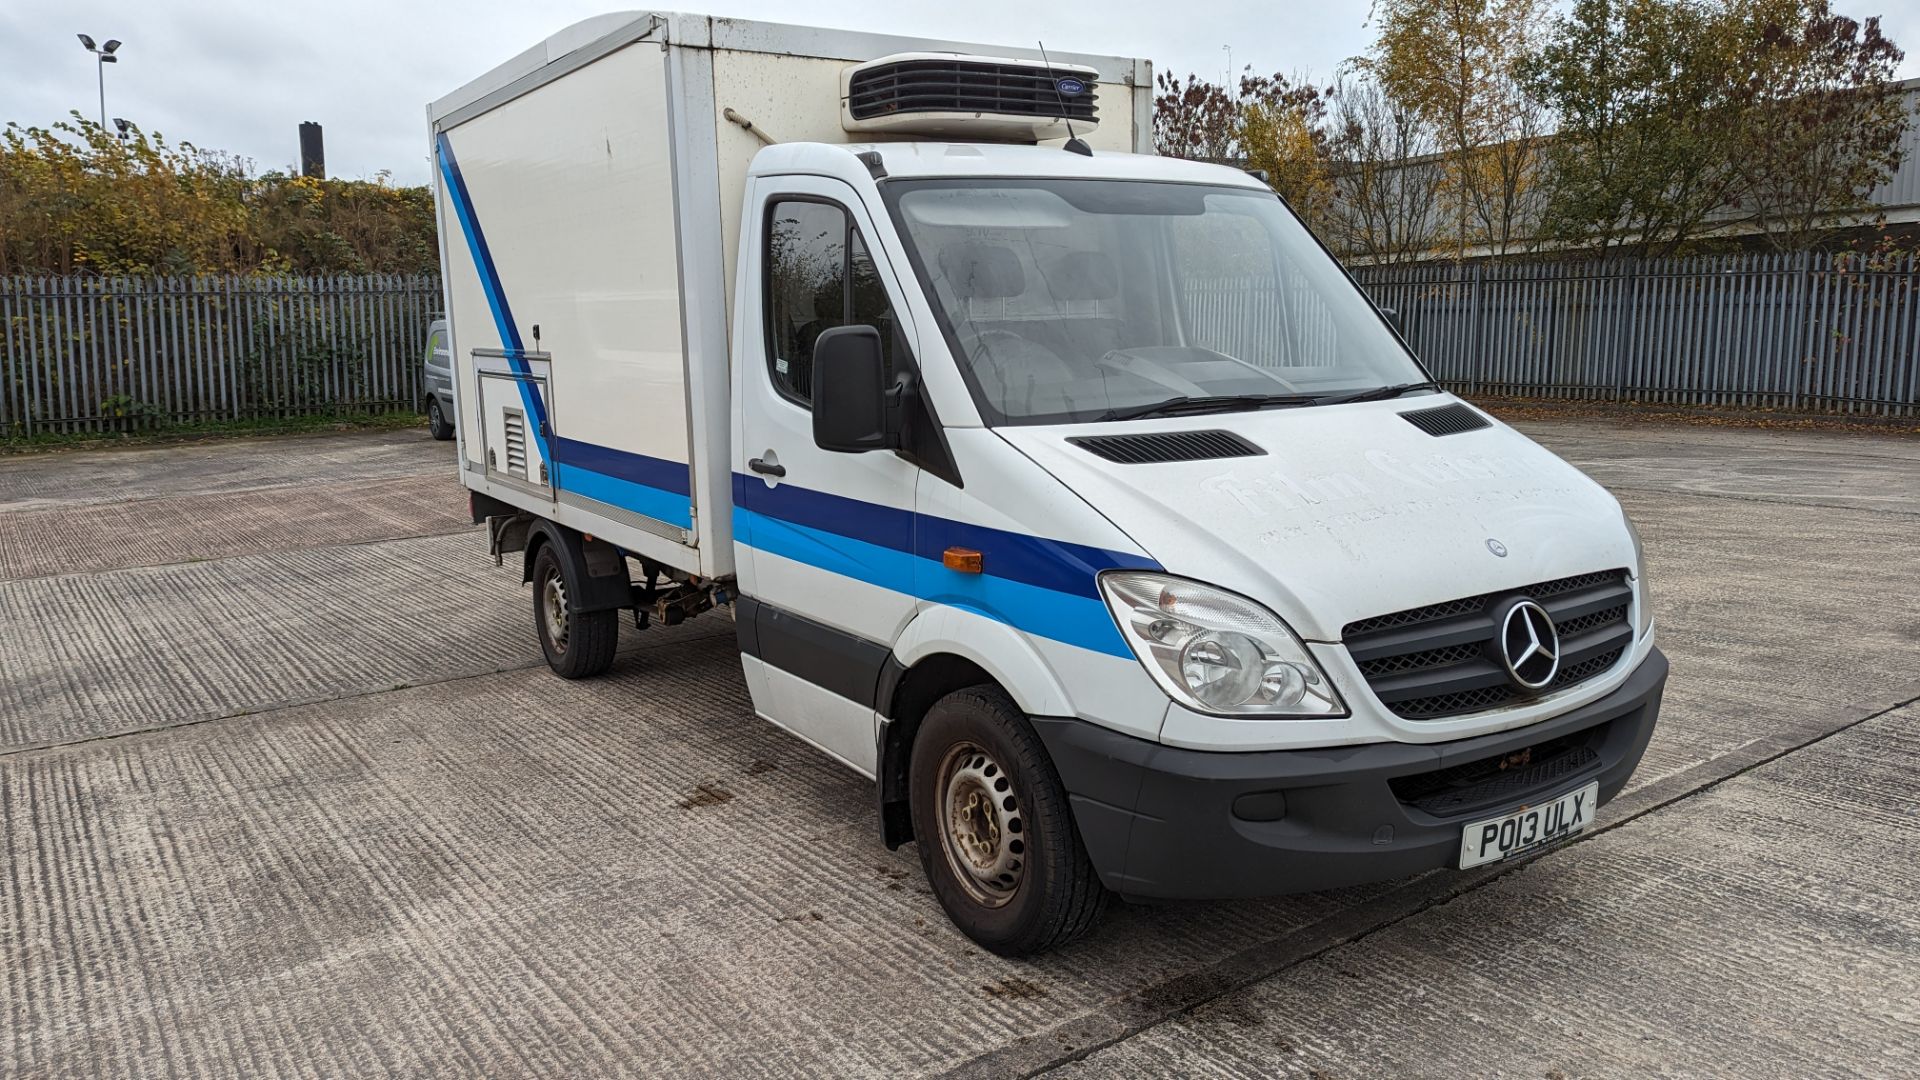 PO13 ULX Mercedes-Benz Sprinter 313 CDI refrigerated box van with onboard generator, 6 speed auto ge - Image 36 of 39